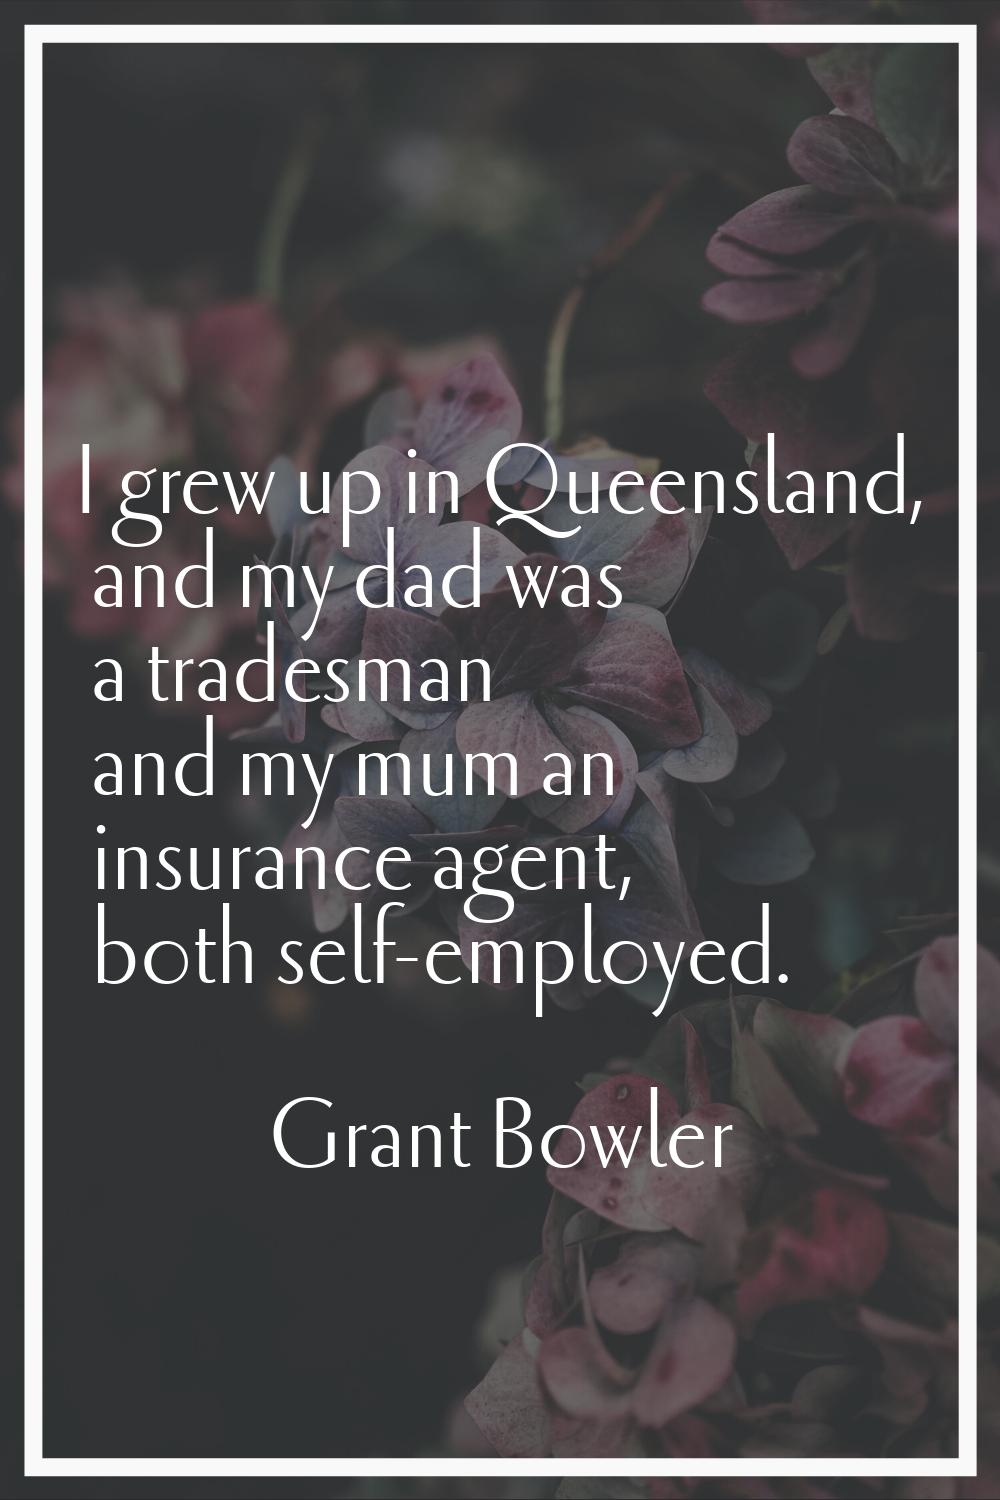 I grew up in Queensland, and my dad was a tradesman and my mum an insurance agent, both self-employ